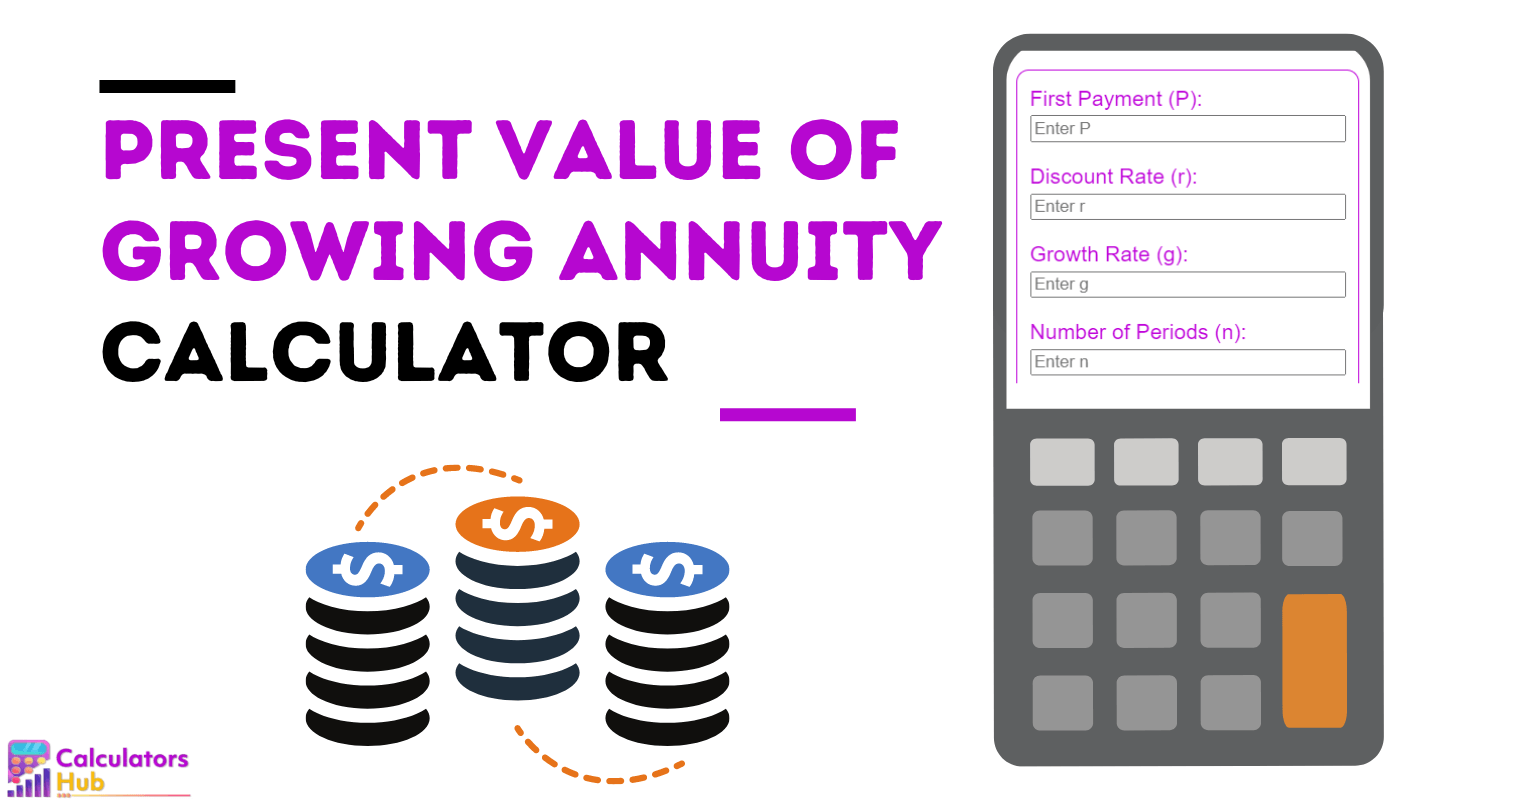 Present Value of Growing Annuity Calculator